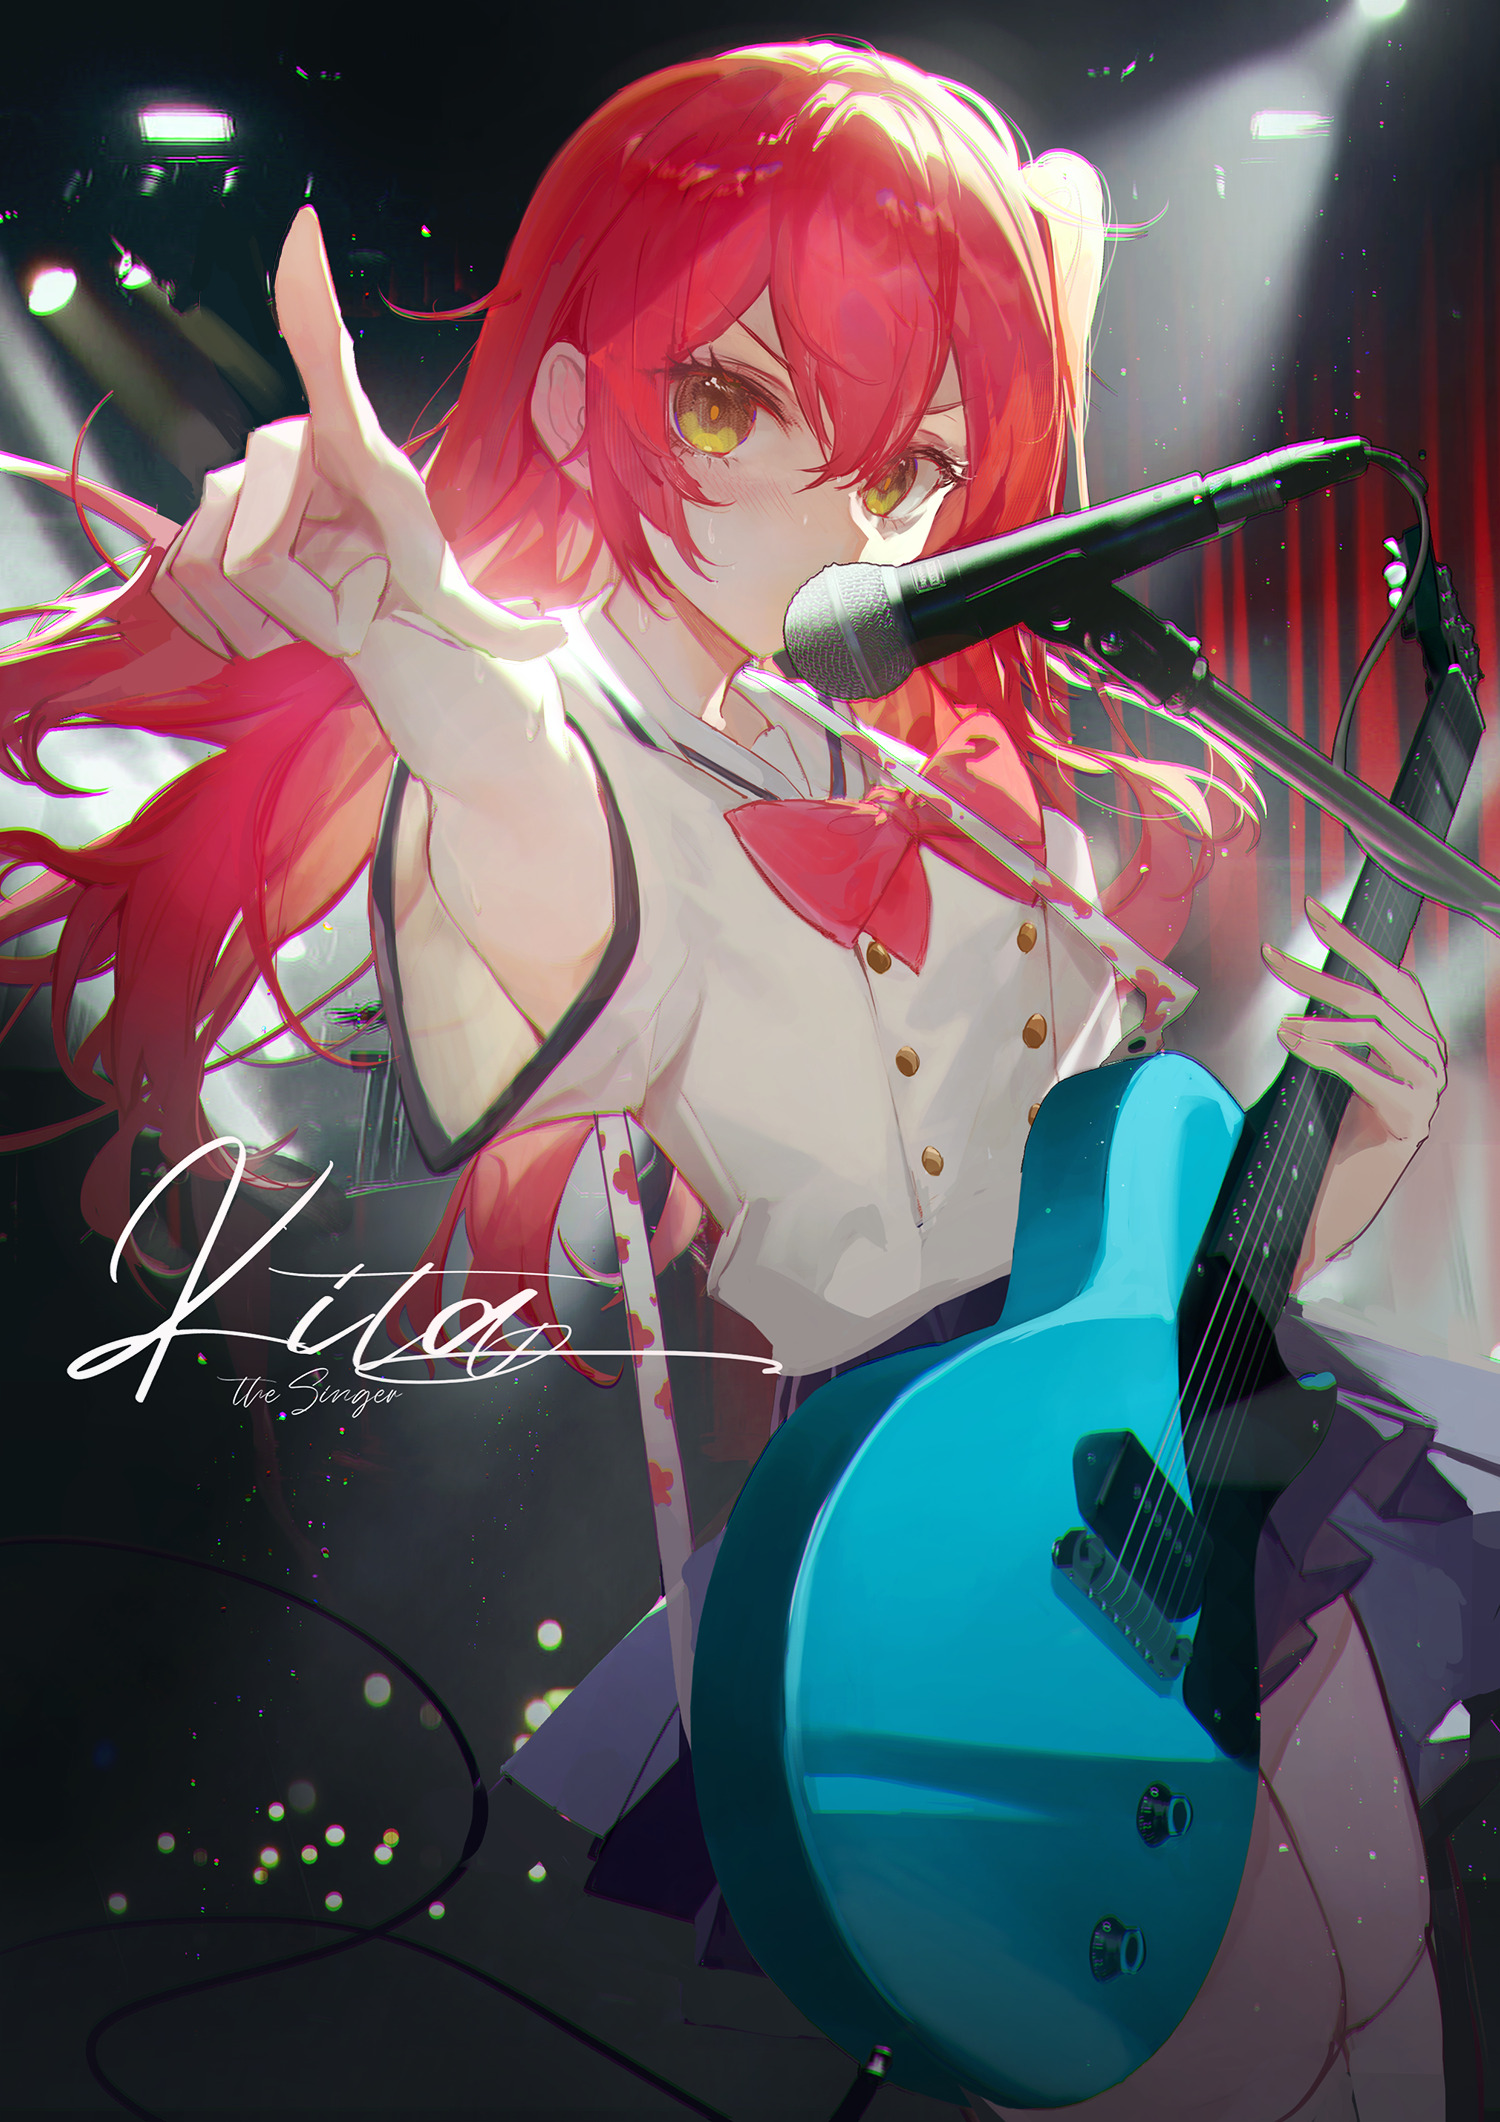 Anime 1500x2122 anime anime girls Pixiv microphone musical instrument finger pointing guitar looking at viewer standing bow tie signature schoolgirl school uniform long hair redhead yellow eyes portrait display stages stage light BOCCHI THE ROCK!